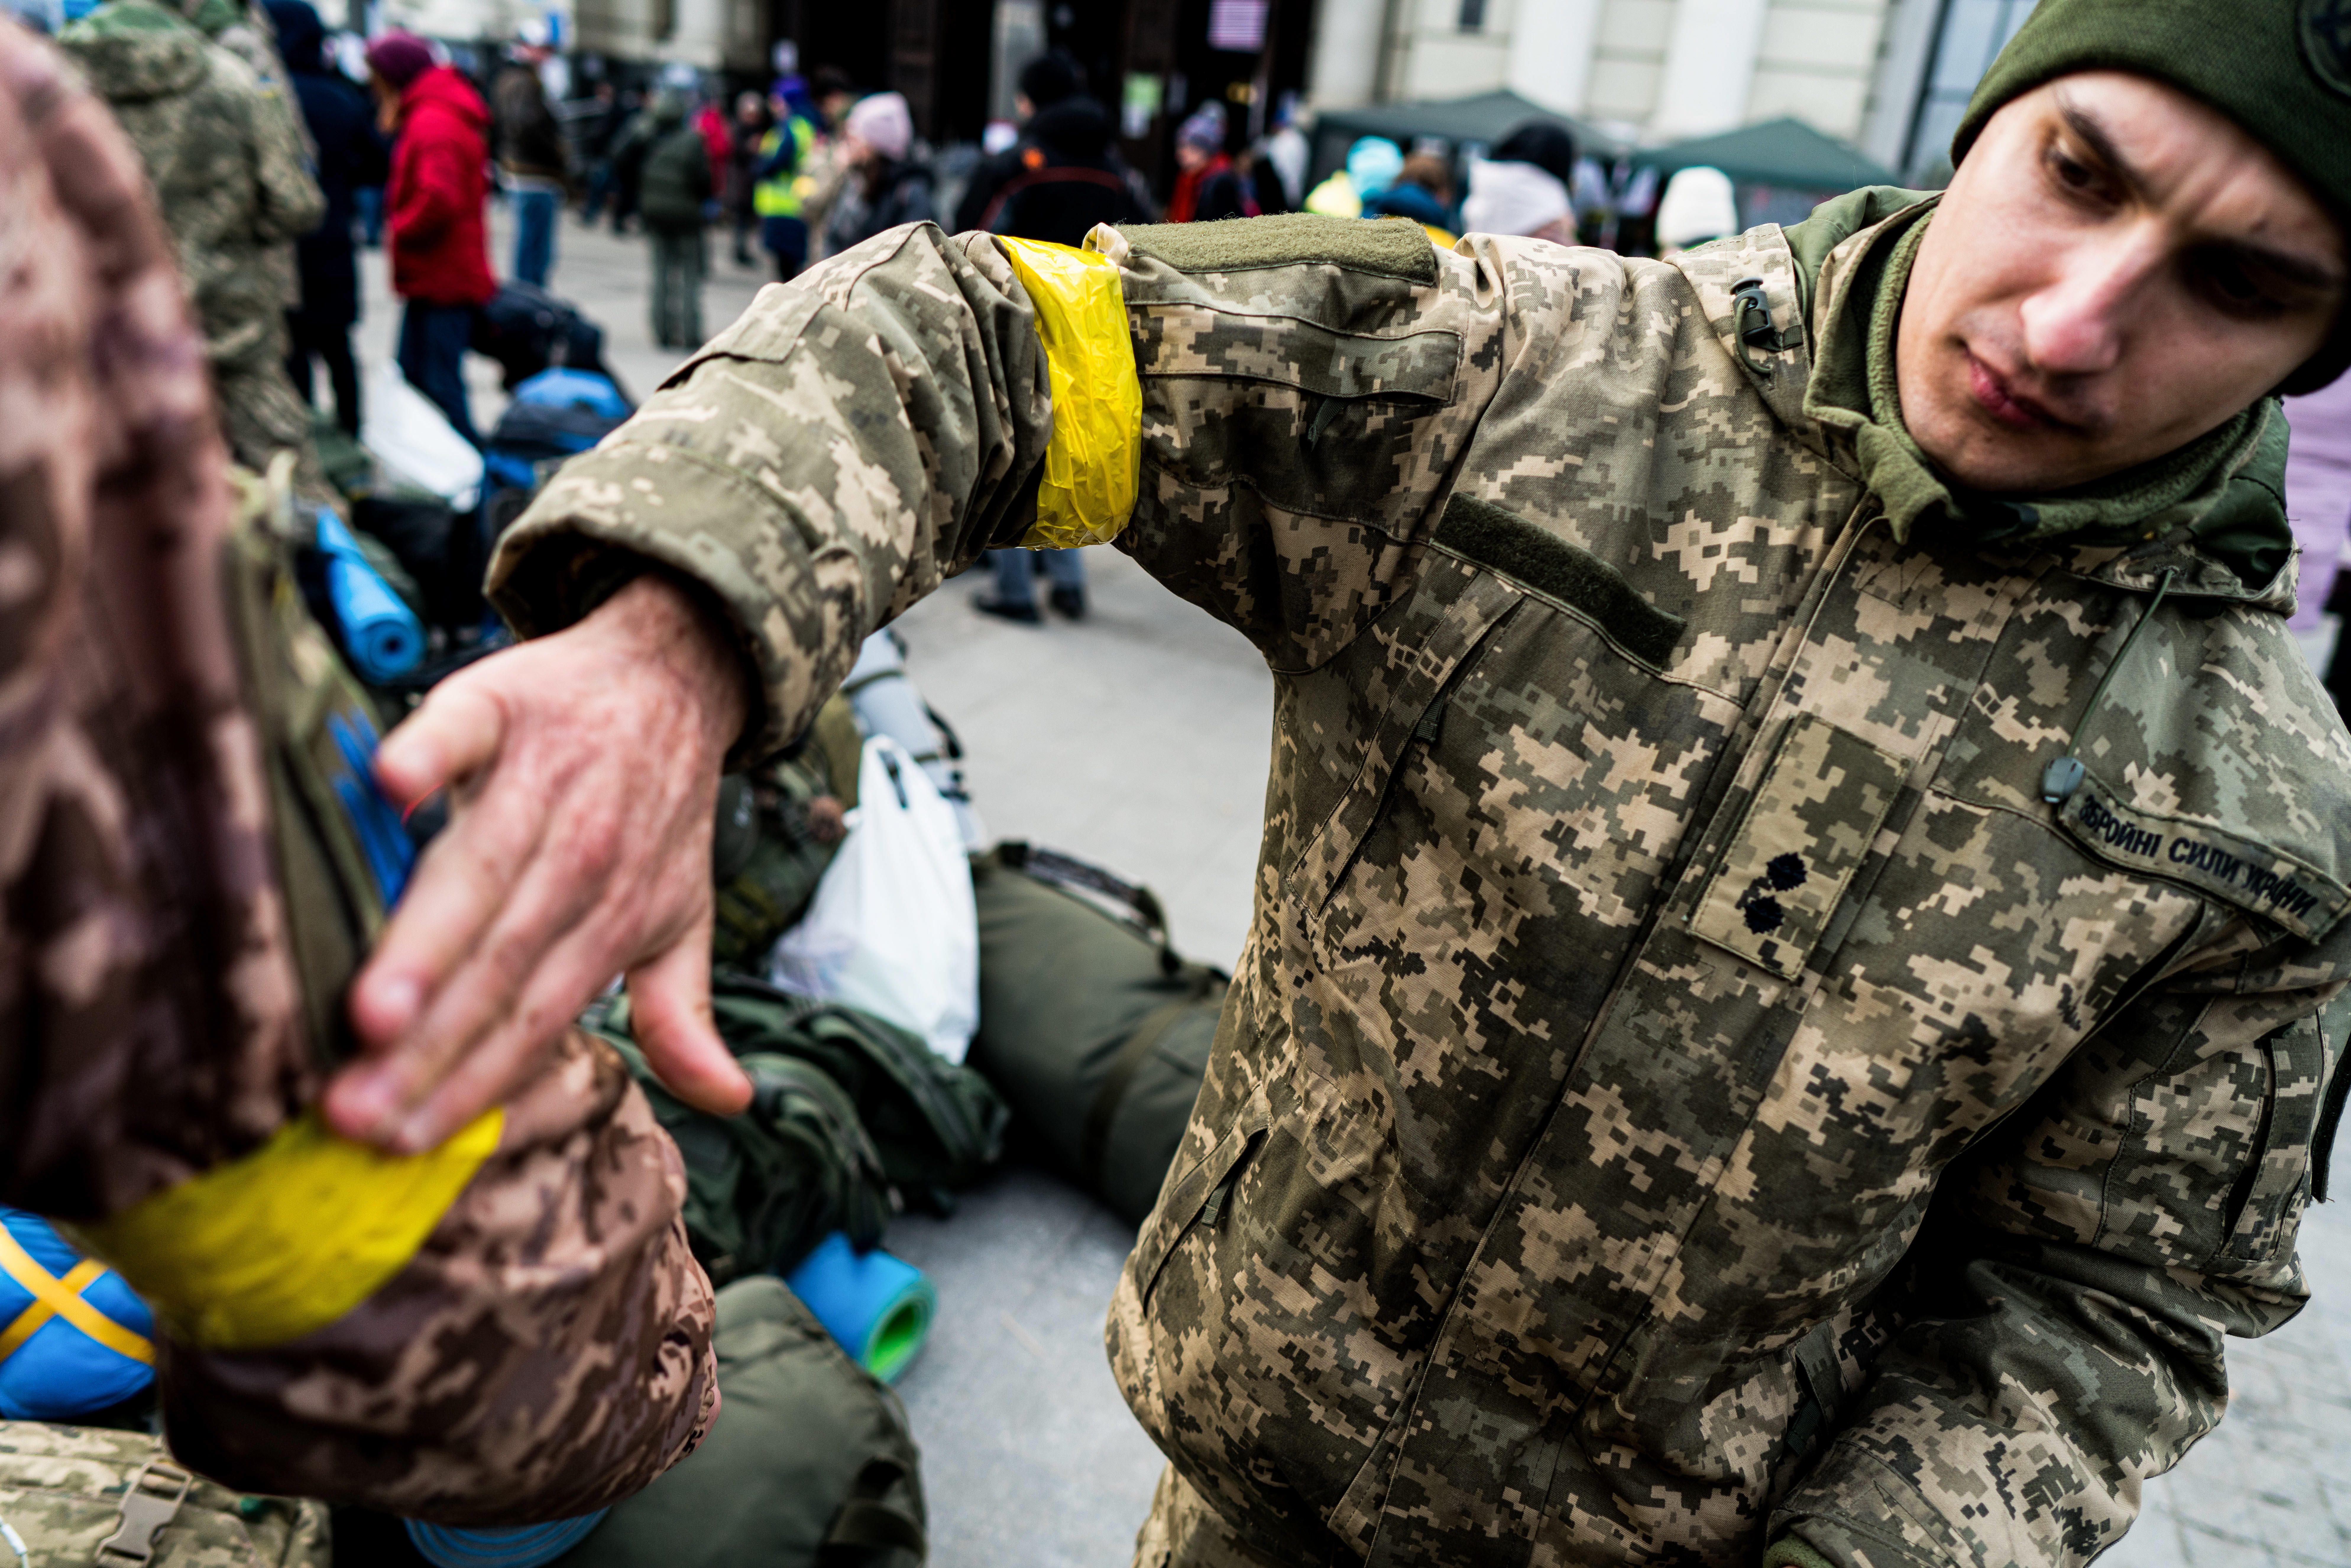 March 9, 2022, Lviv, Ukraine: A soldier putting the yellow ribbon on his comrade-in-arms arm in Lviv..As Russia launched a full-scale invasion of Ukraine, people try to escape the country passing through Lviv, while others get ready to fight the Russian army. (Credit Image: Global Look Press/Keystone Press Agency)